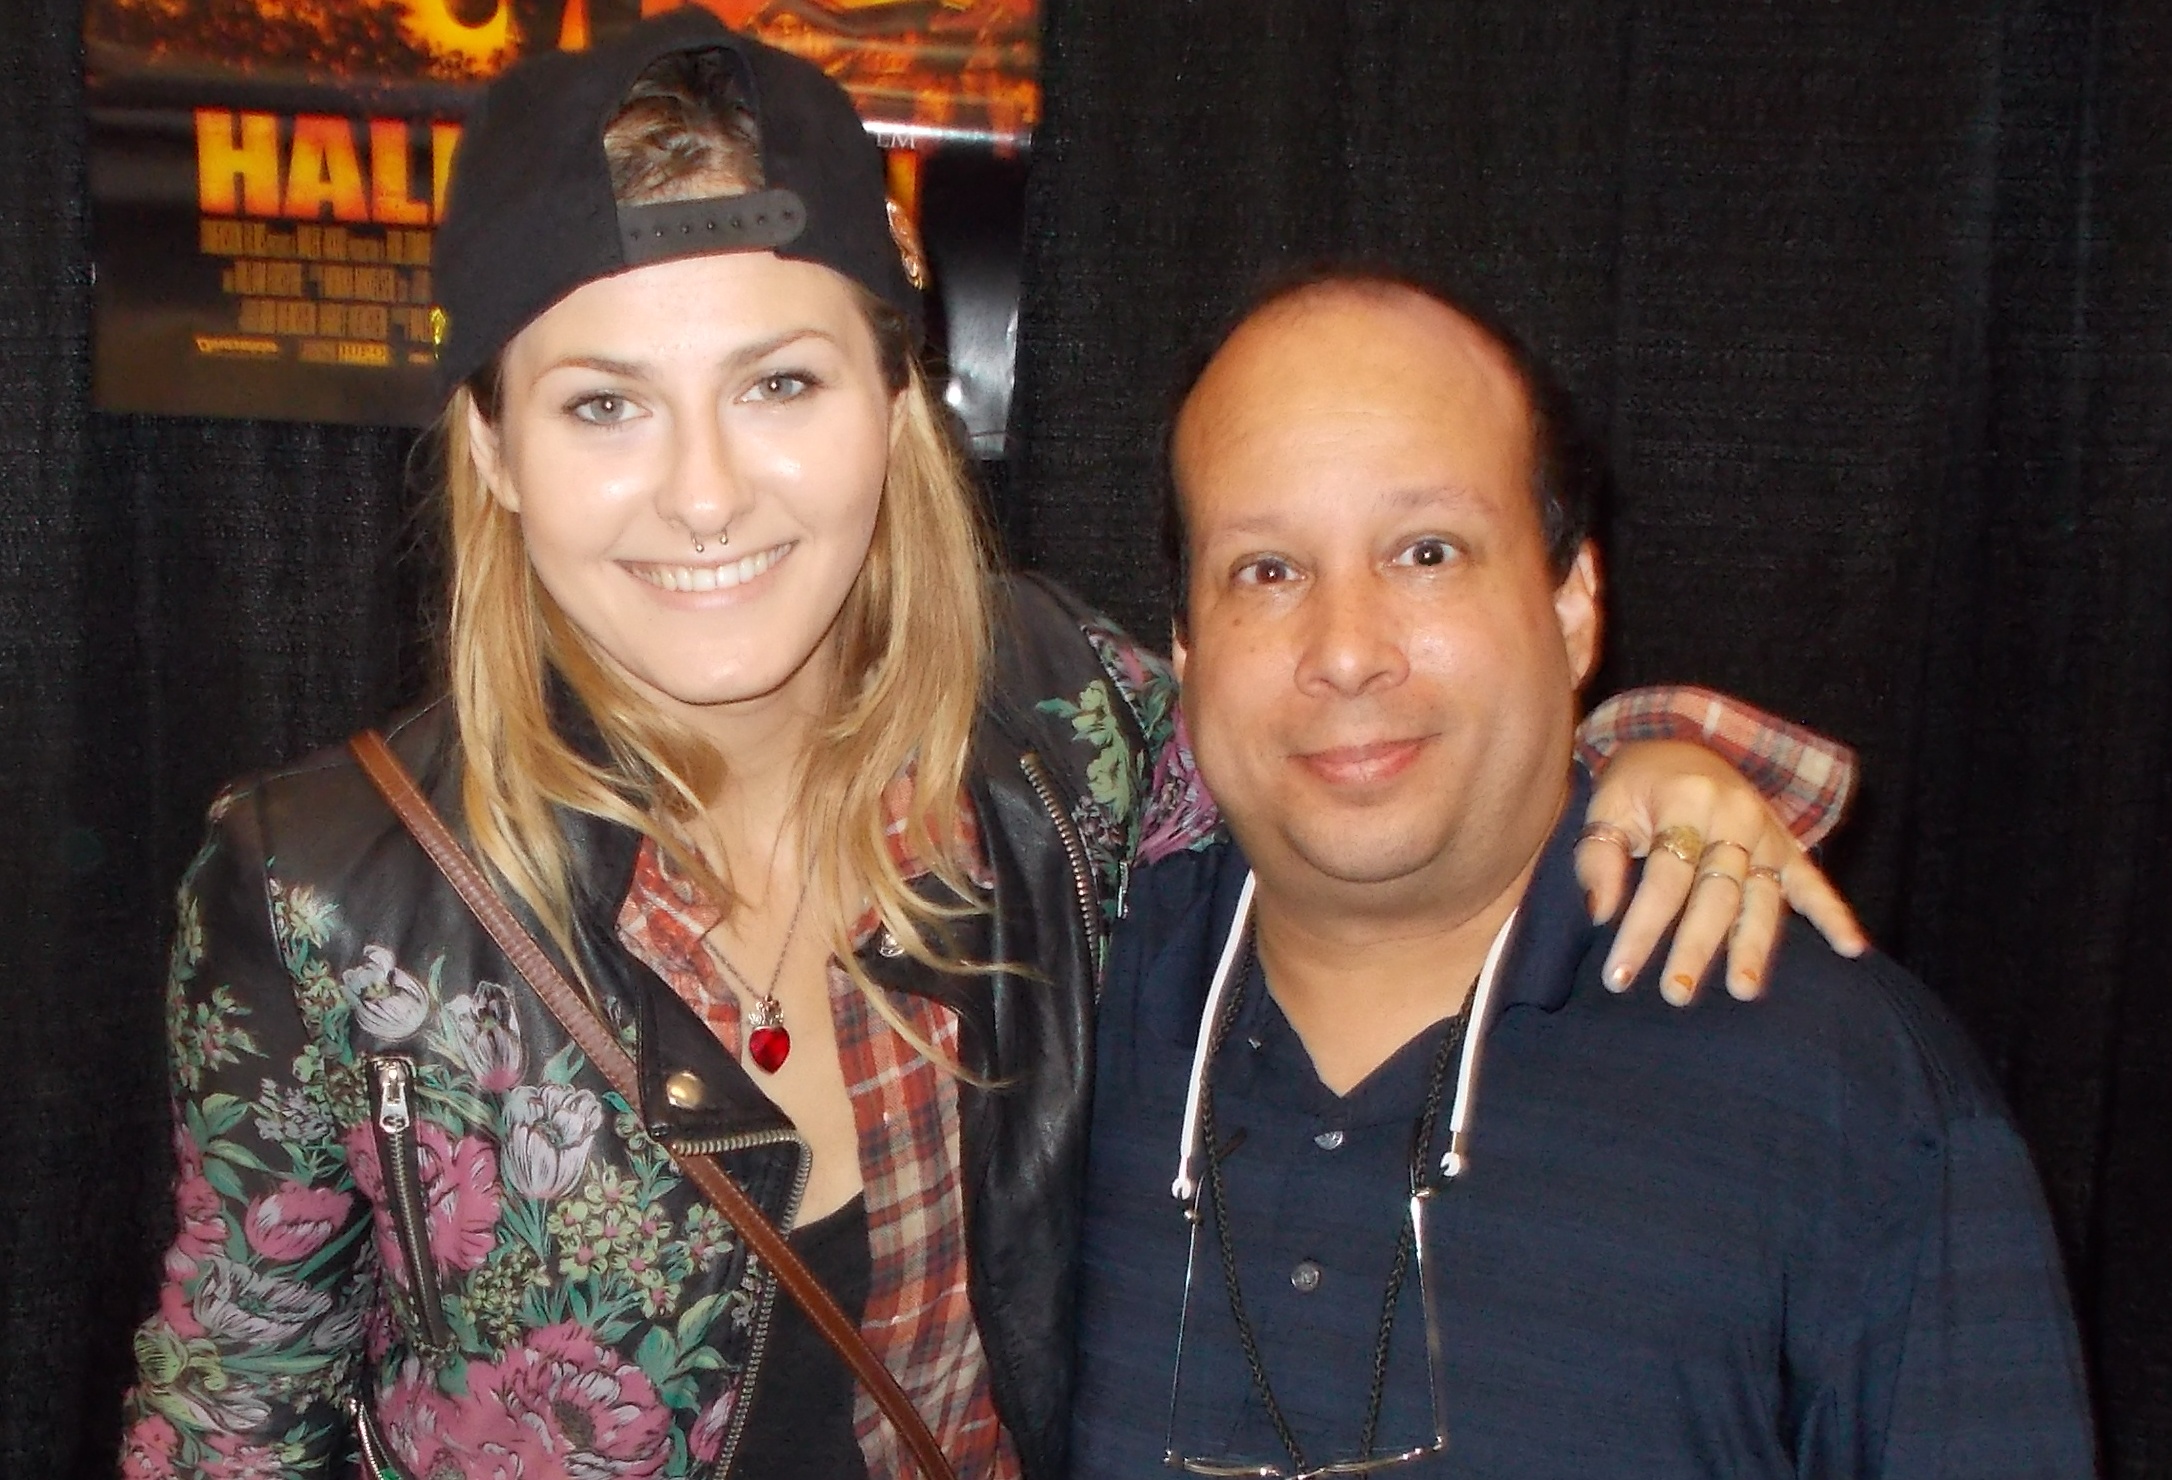 Michael J. Tomaso and Scout Taylor-Compton (who played 'Laurie Strode' in Rob Zombie's versions of 